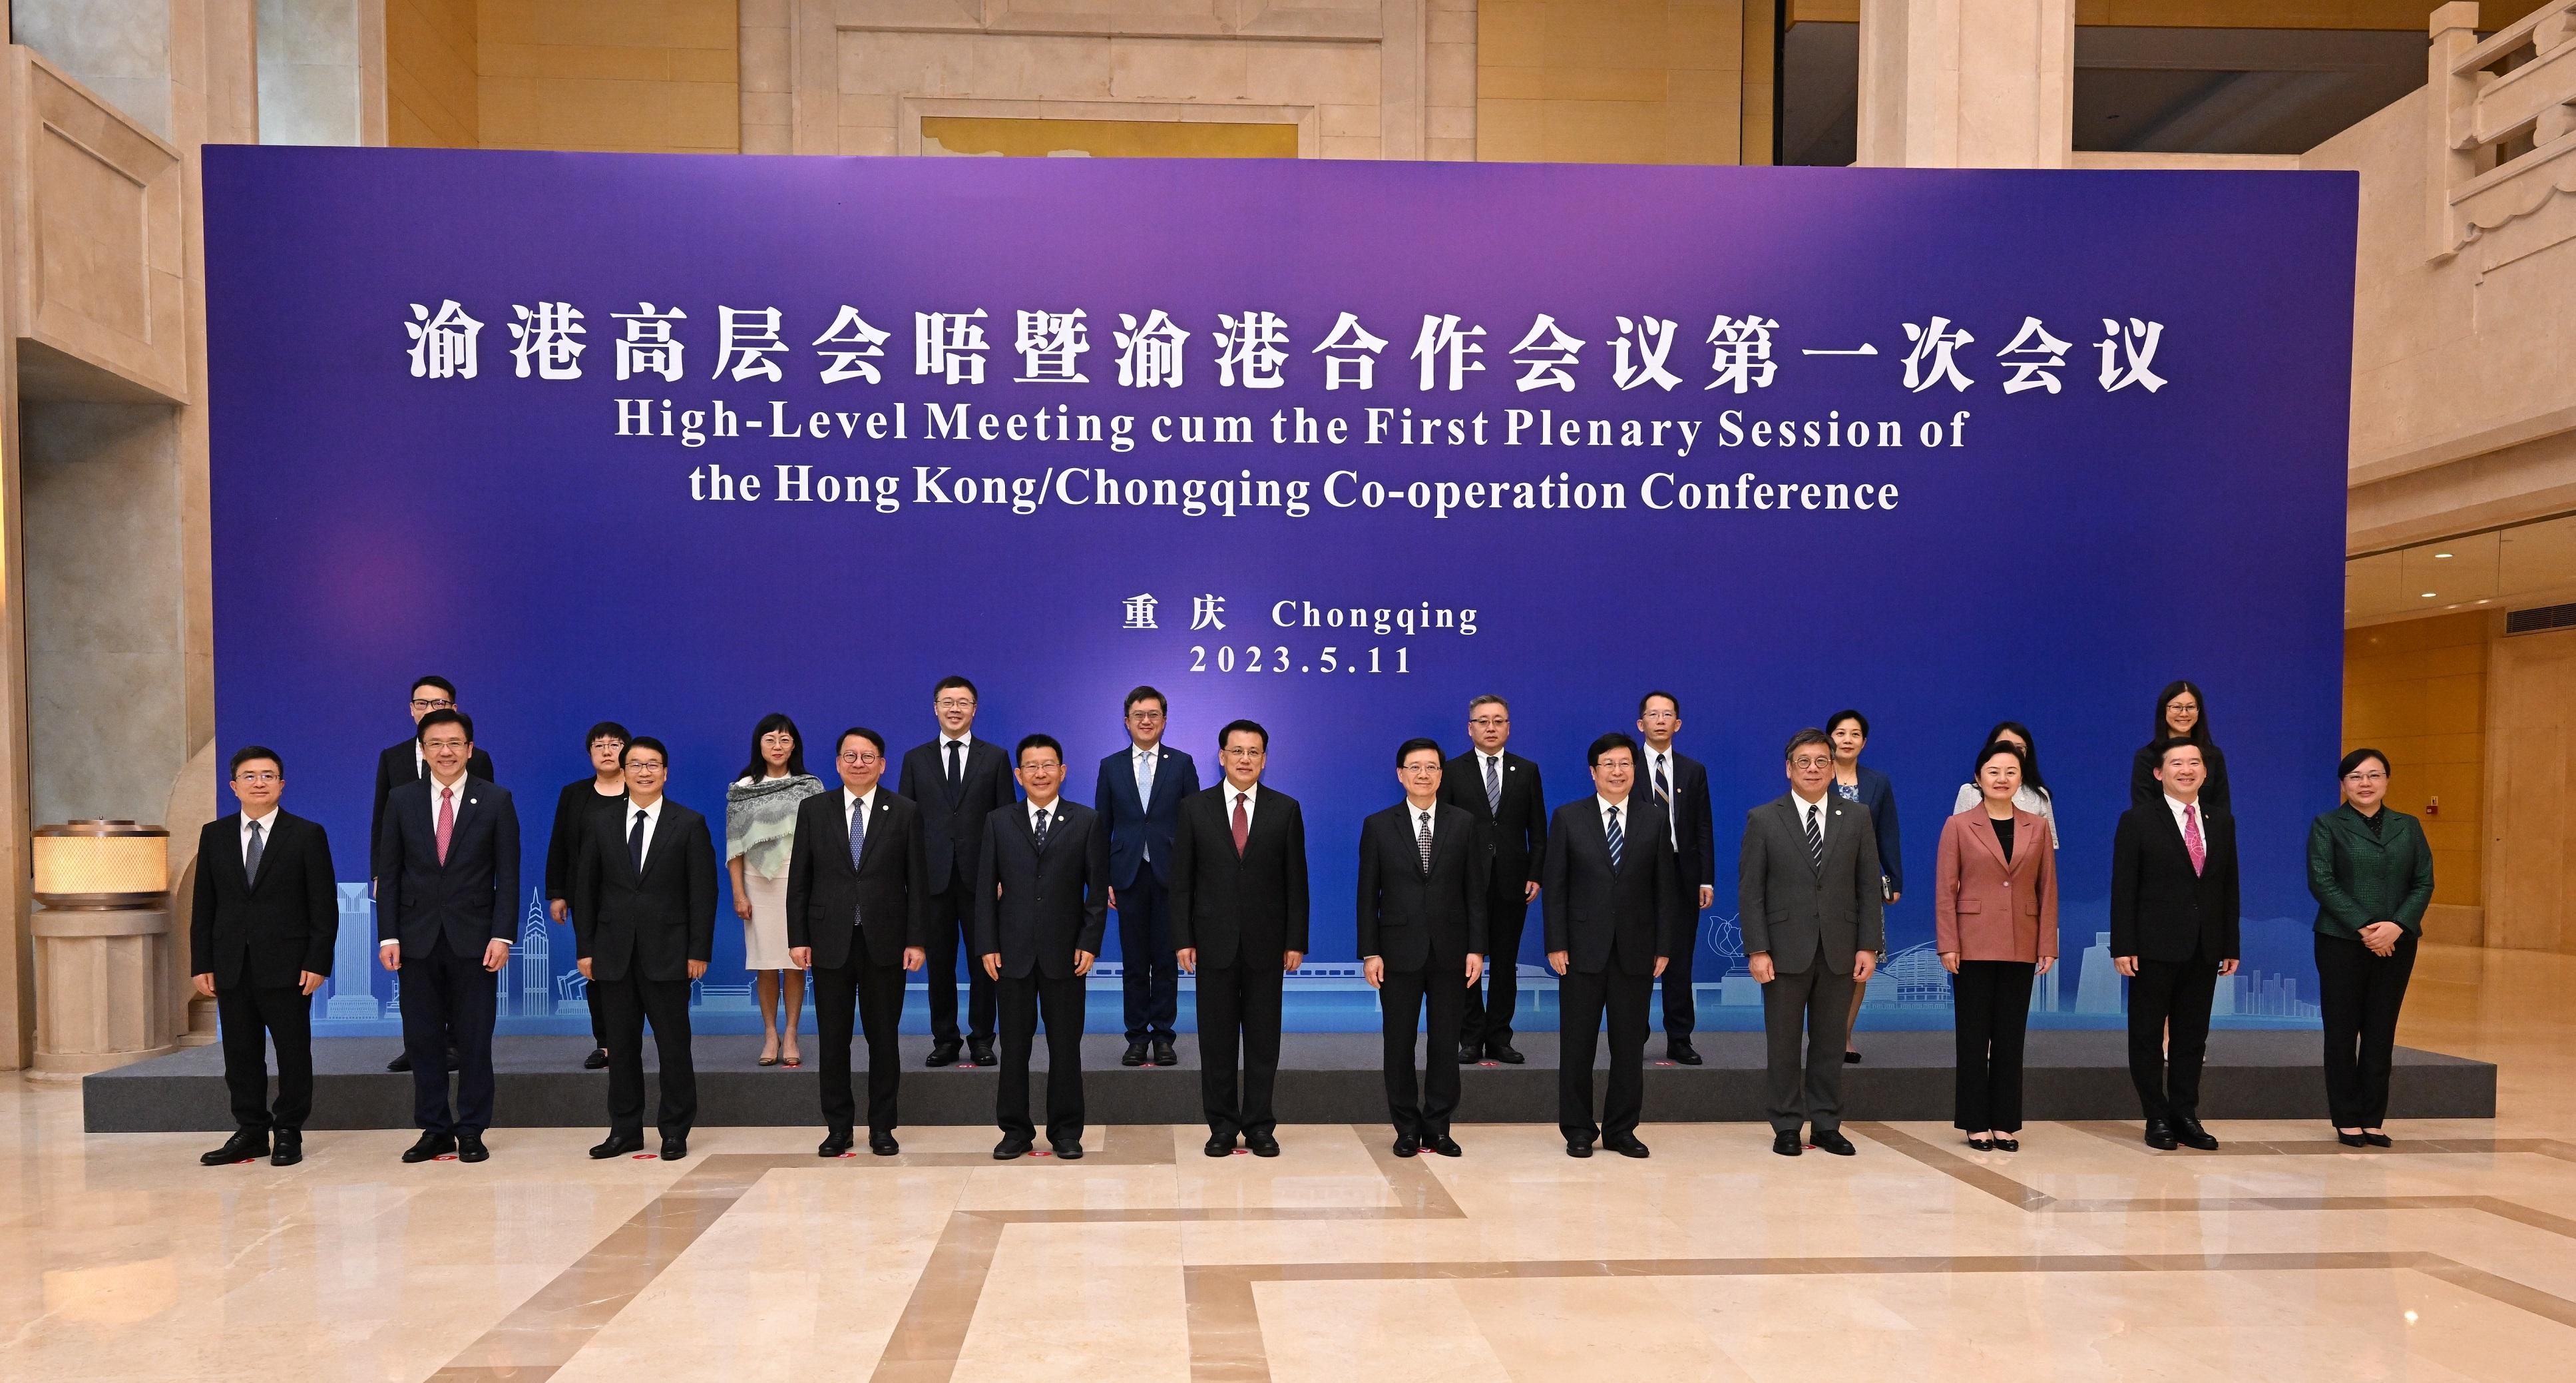 The Chief Executive, Mr John Lee, attends the High-Level Meeting cum First Plenary Session of the Hong Kong/Chongqing Co-operation Conference in Chongqing today (May 11). Photo shows (front row, from fourth left) the Chief Secretary for Administration, Mr Chan Kwok-ki; Deputy Director of the Hong Kong and Macao Affairs Office of the State Council Mr Wang Linggui; the Secretary of the CPC Chongqing Municipal Committee, Mr Yuan Jiajun; Mr Lee, and the Mayor of Chongqing, Mr Hu Henghua, and other participants before the Plenary.